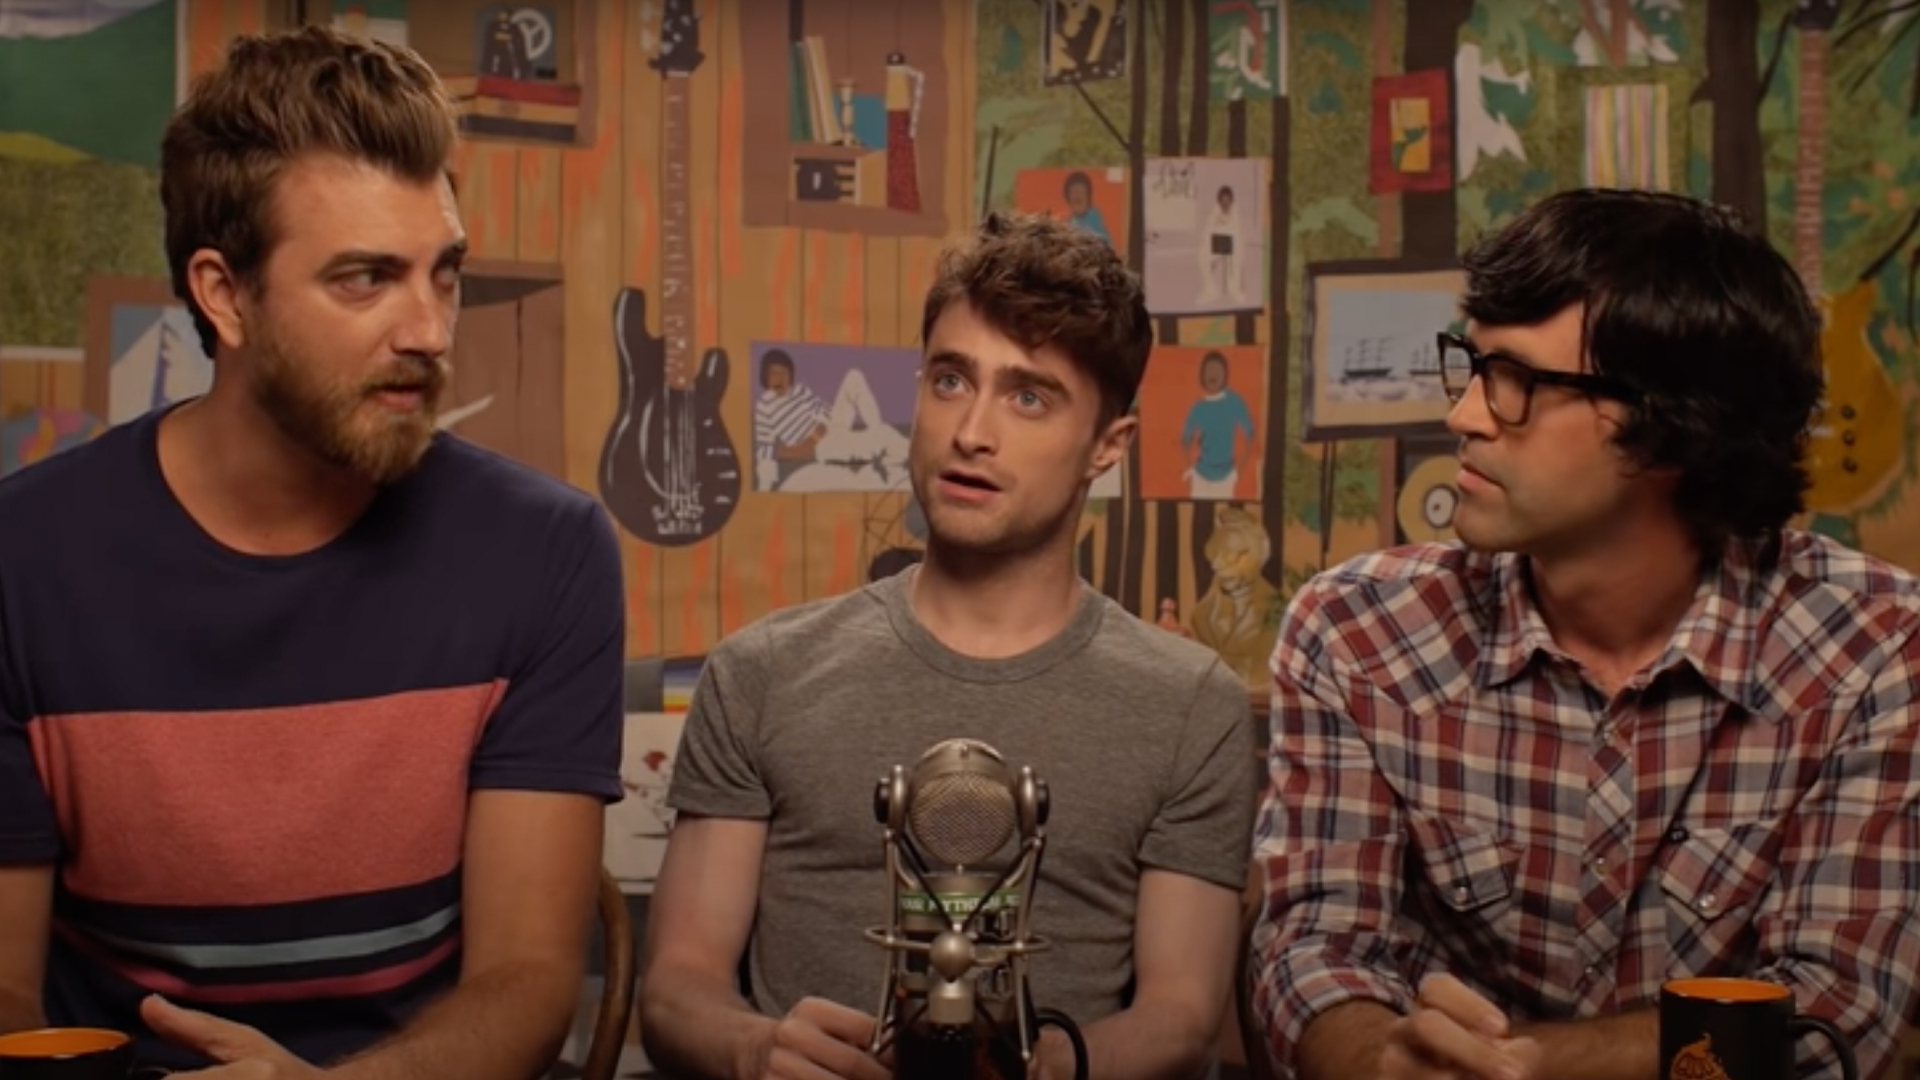 Daniel Radcliffe appears as a guest on Good Mythical Morning